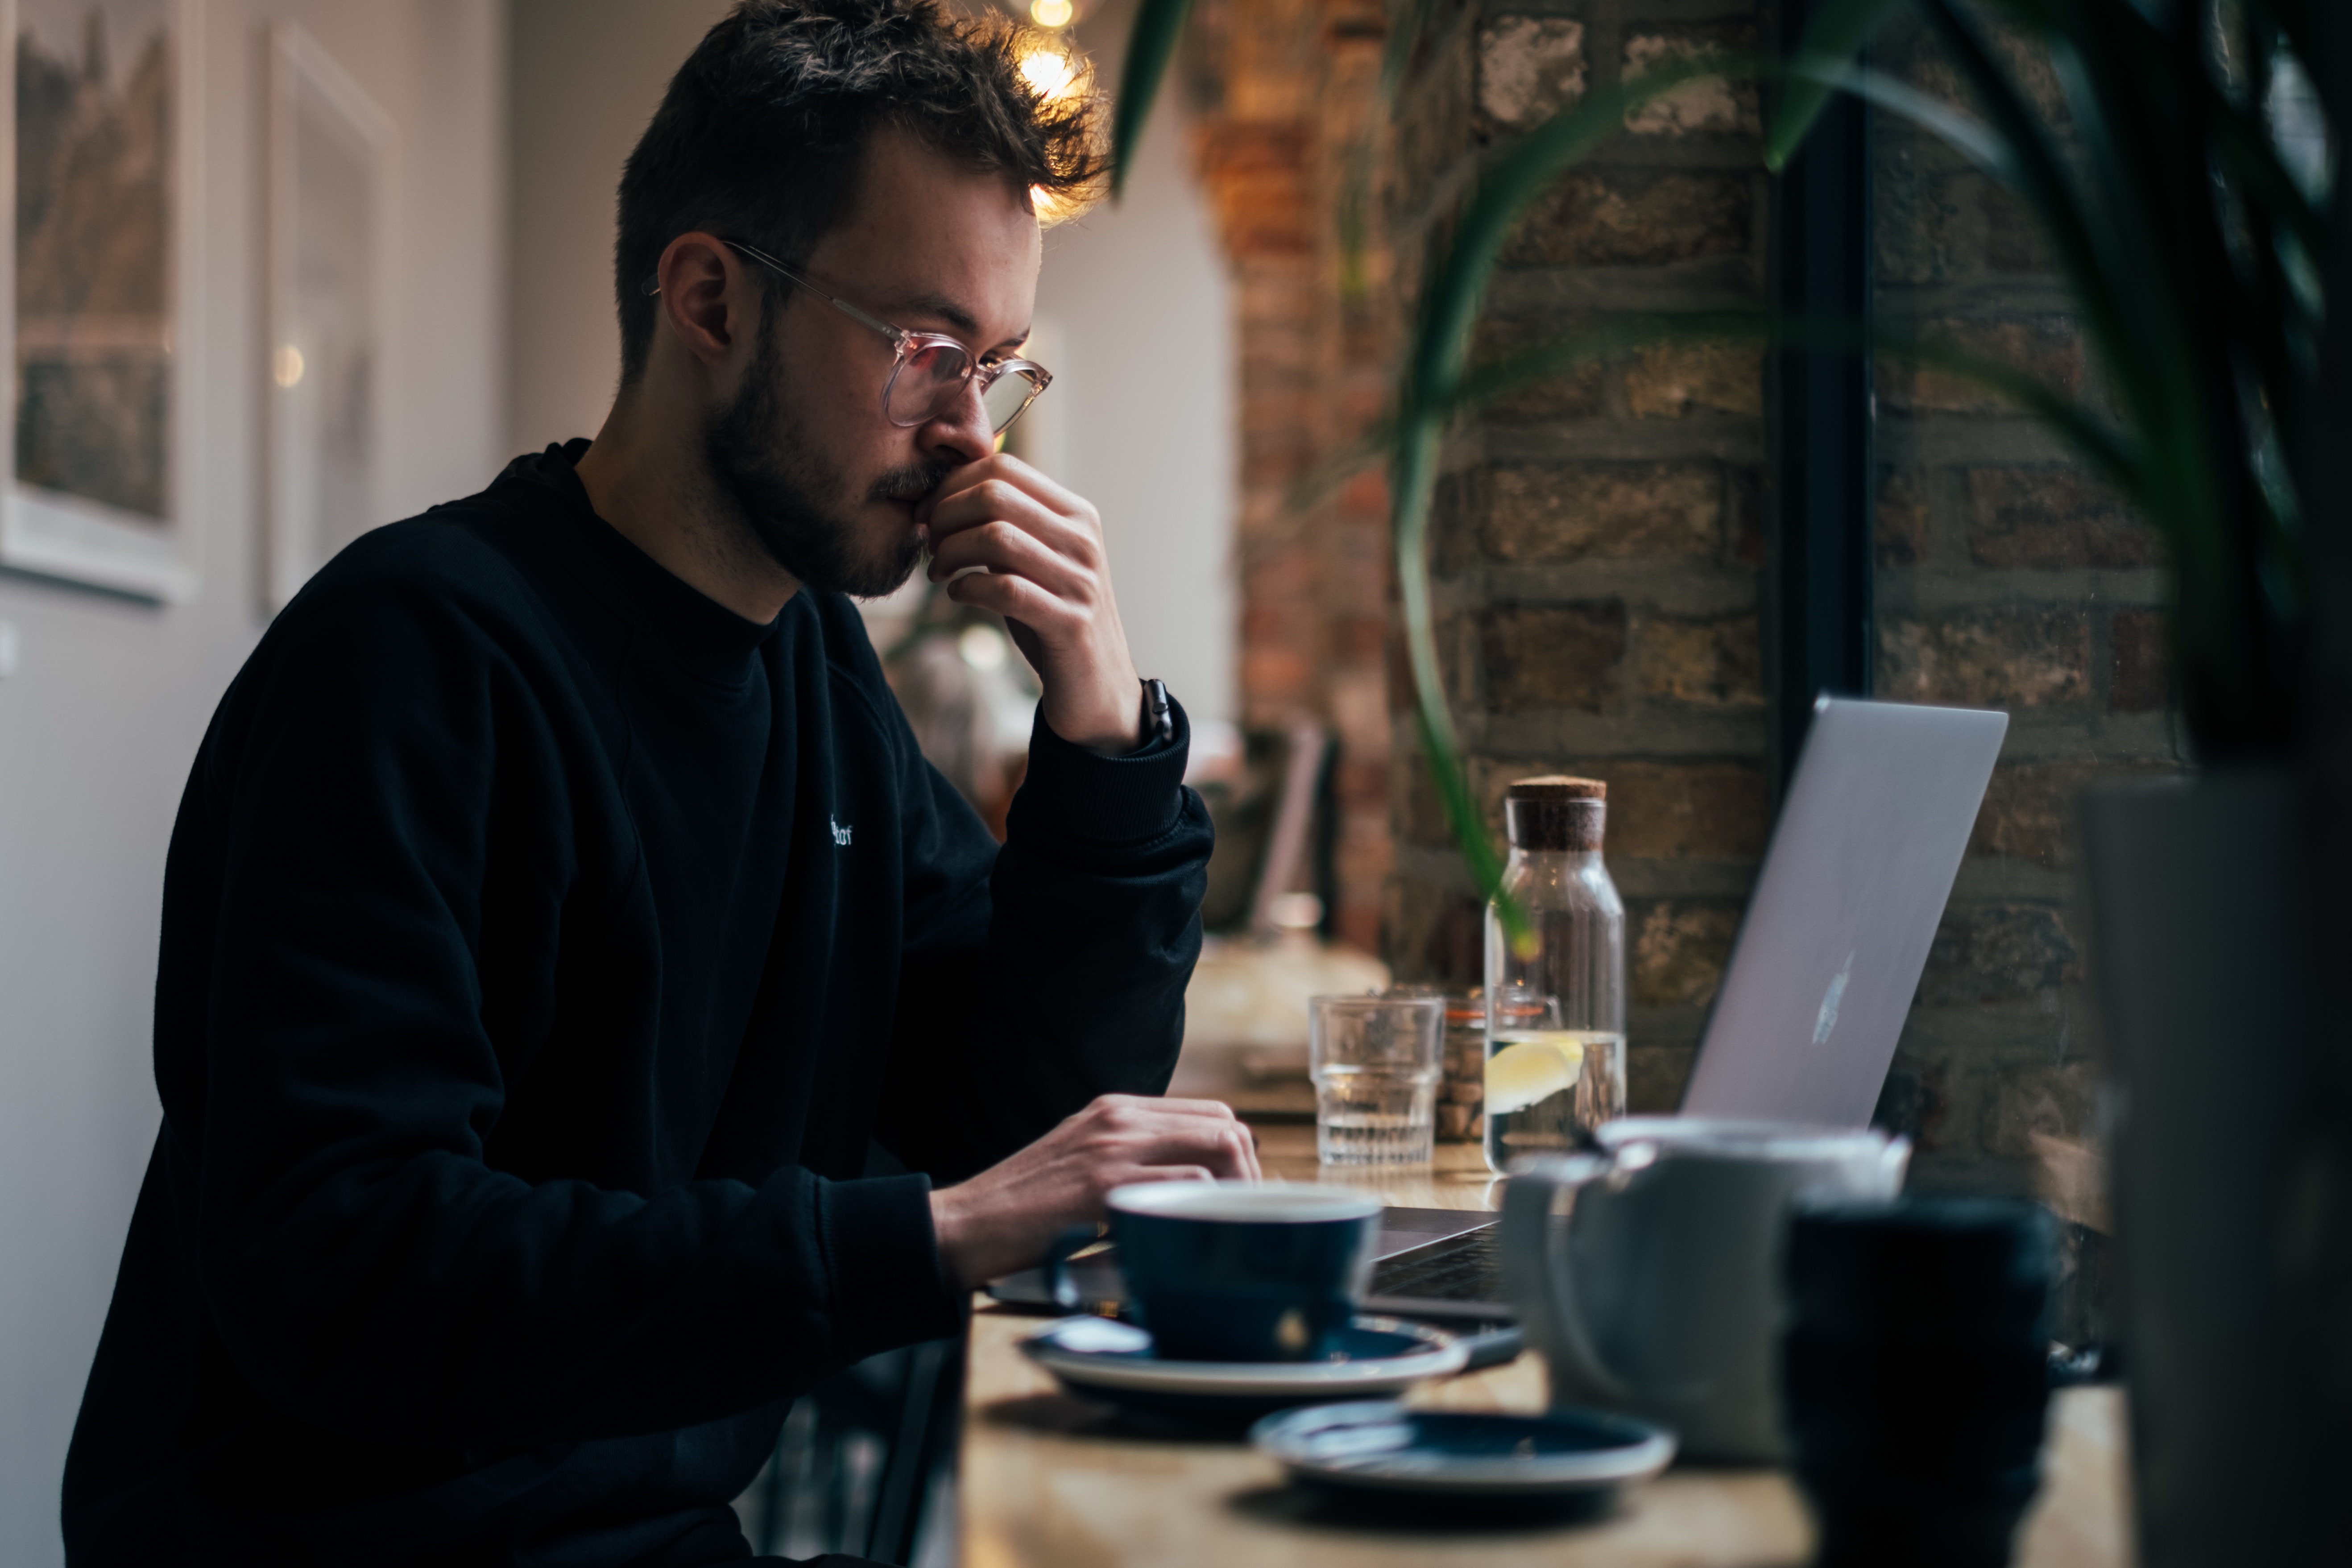 A man stands in front of his open laptop at a coffee shop, as he is deep in thought.